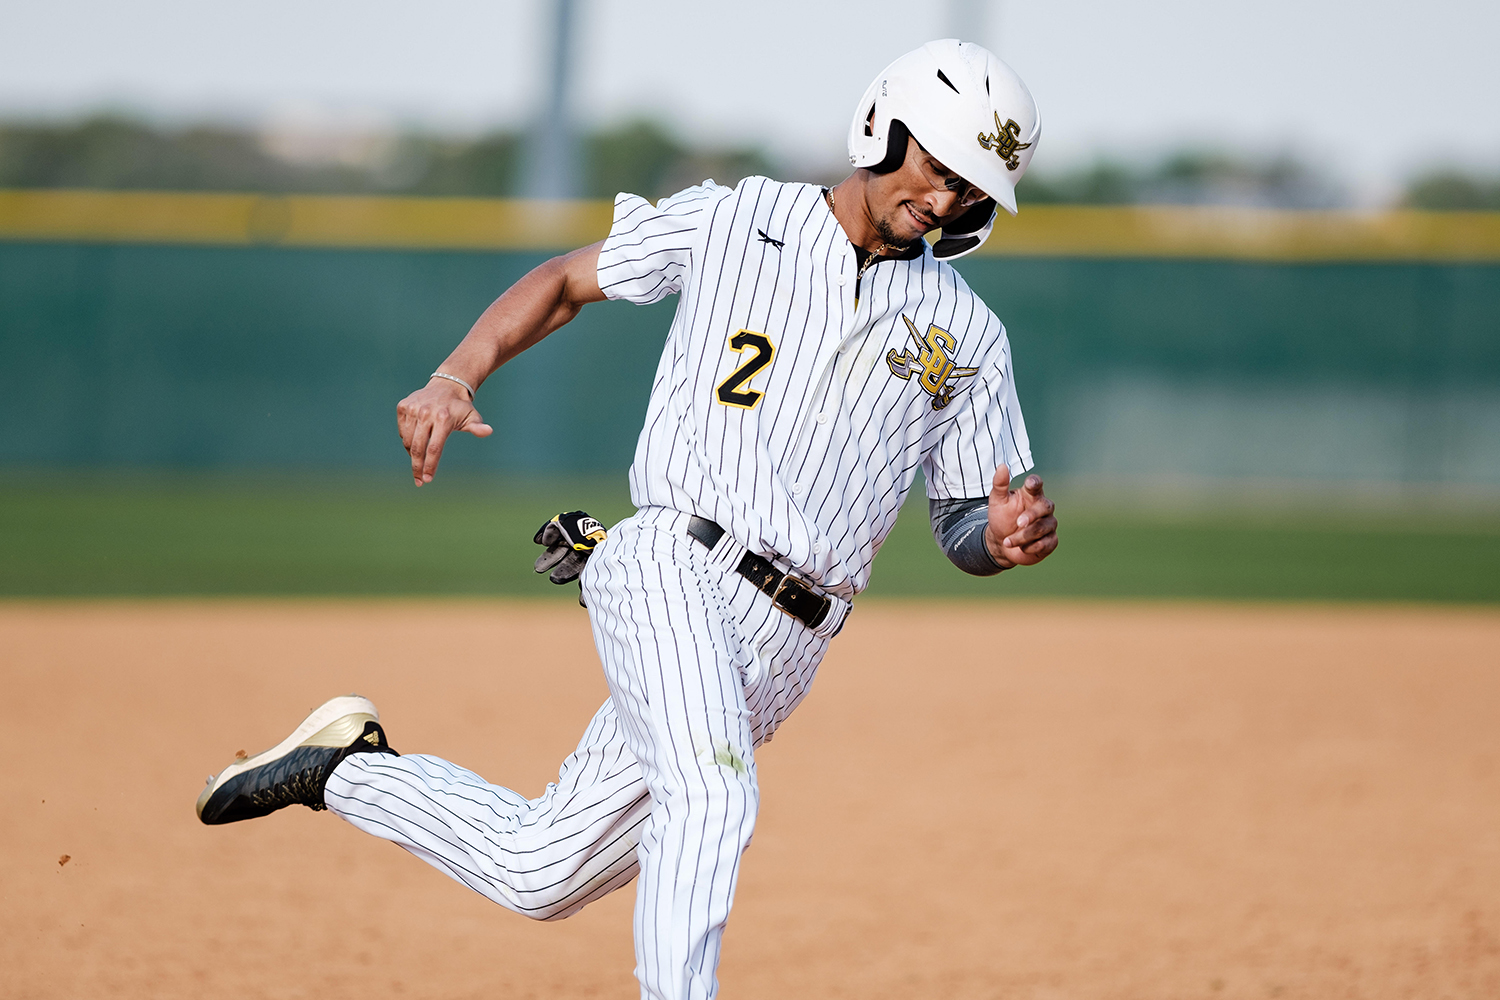 Byron Dowdell II, dressed in the Pirates white with black pinstripes uniform and white helmet, rounds third after a home run. 